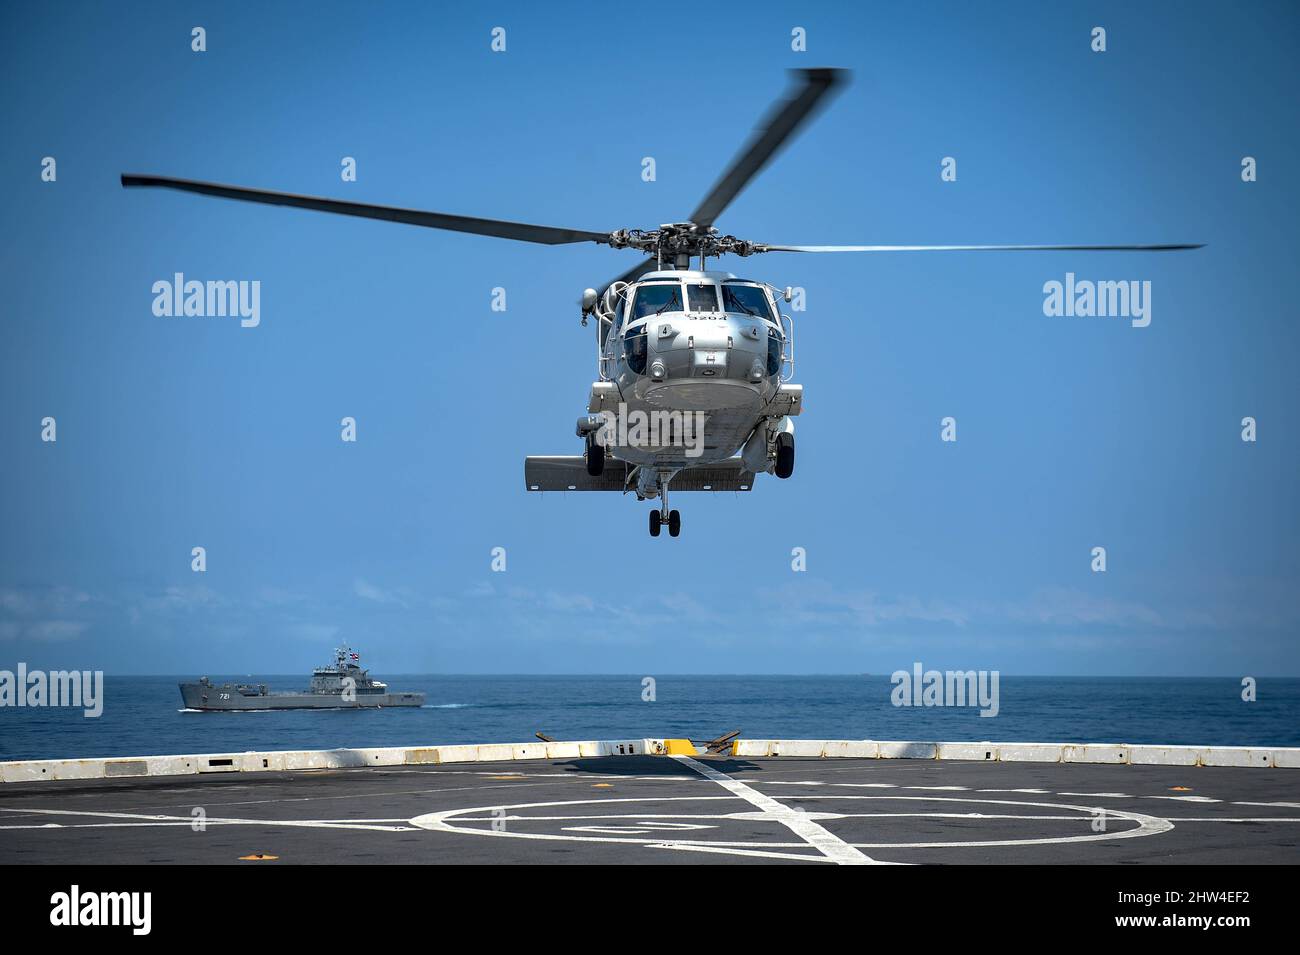 GULF OF THAILAND (March 1, 2022) An SH-70B Sea Hawk helicopter from the Royal Thai Navy lands on the deck of the amphibious transport dock ship USS Green Bay (LPD 20) during exercise Cobra Gold 22. Cobra Gold 2022 is the 14st iteration of the international training exercise that supports readiness and emphasizes coordination on civic action, humanitarian assistance, and disaster relief. From Feb. 22 through March 4, 2022, this annual event taking place at various locations throughout the Kingdom of Thailand increases the capability, capacity, and interoperability of partnered nations while sim Stock Photo